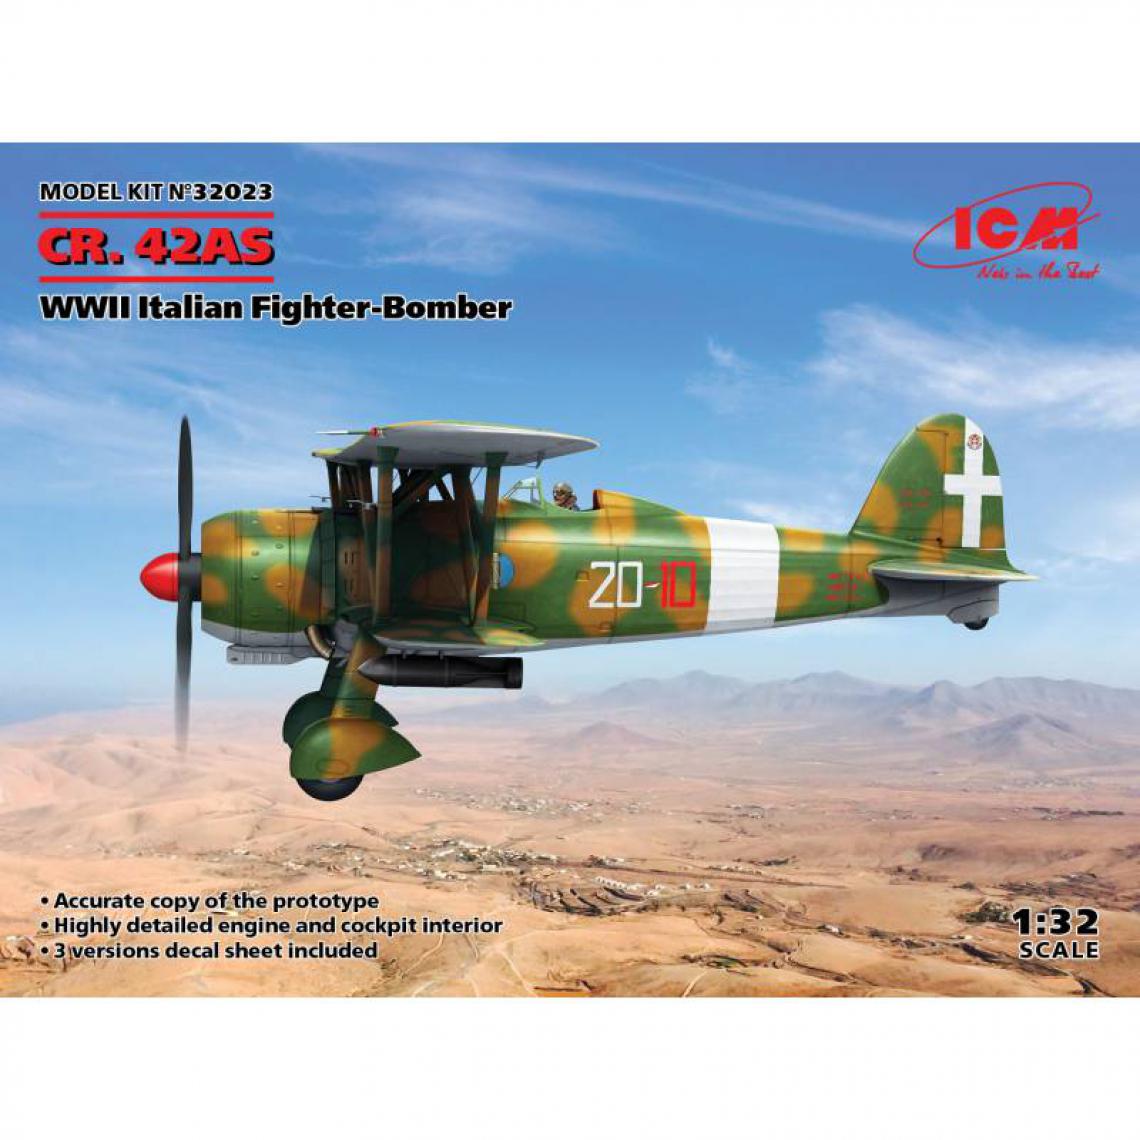 Icm - Maquette Avion Cr. 42as Wwii Italian Fighter-bomber - Avions